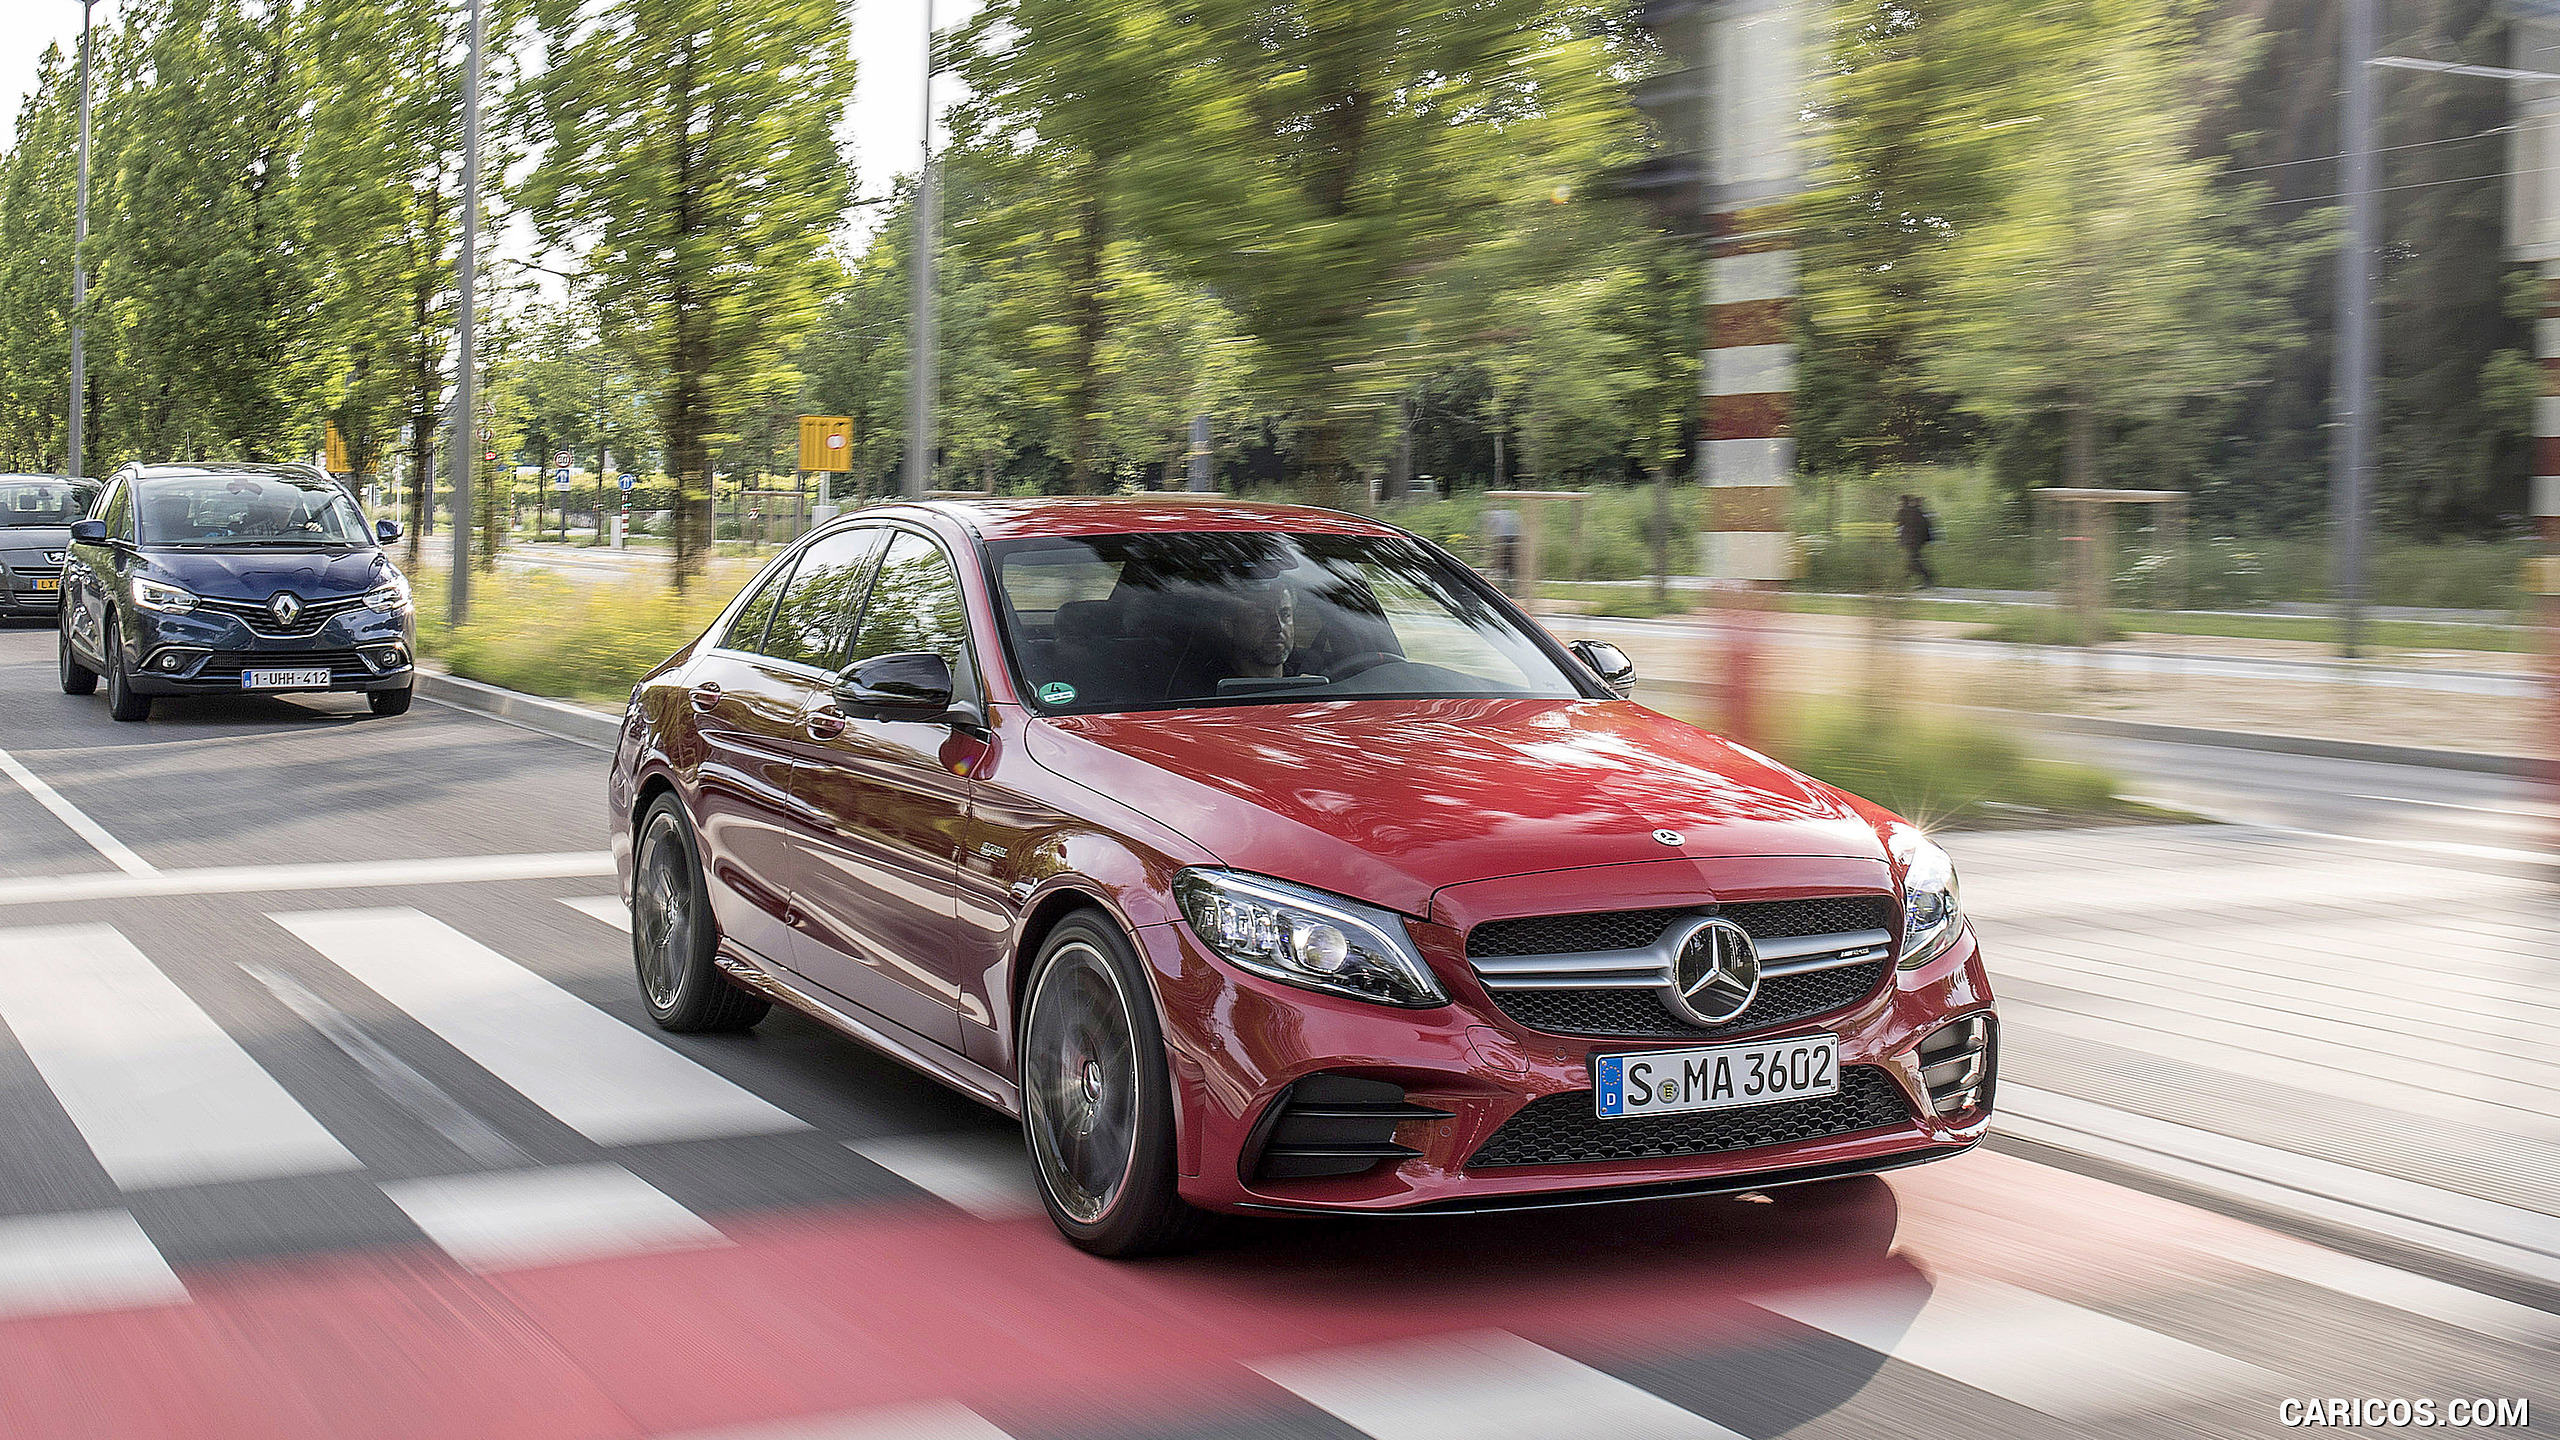 2019 Mercedes-AMG C43 4MATIC Sedan (Color: Hyacinth Red) - Front Three-Quarter, #47 of 192